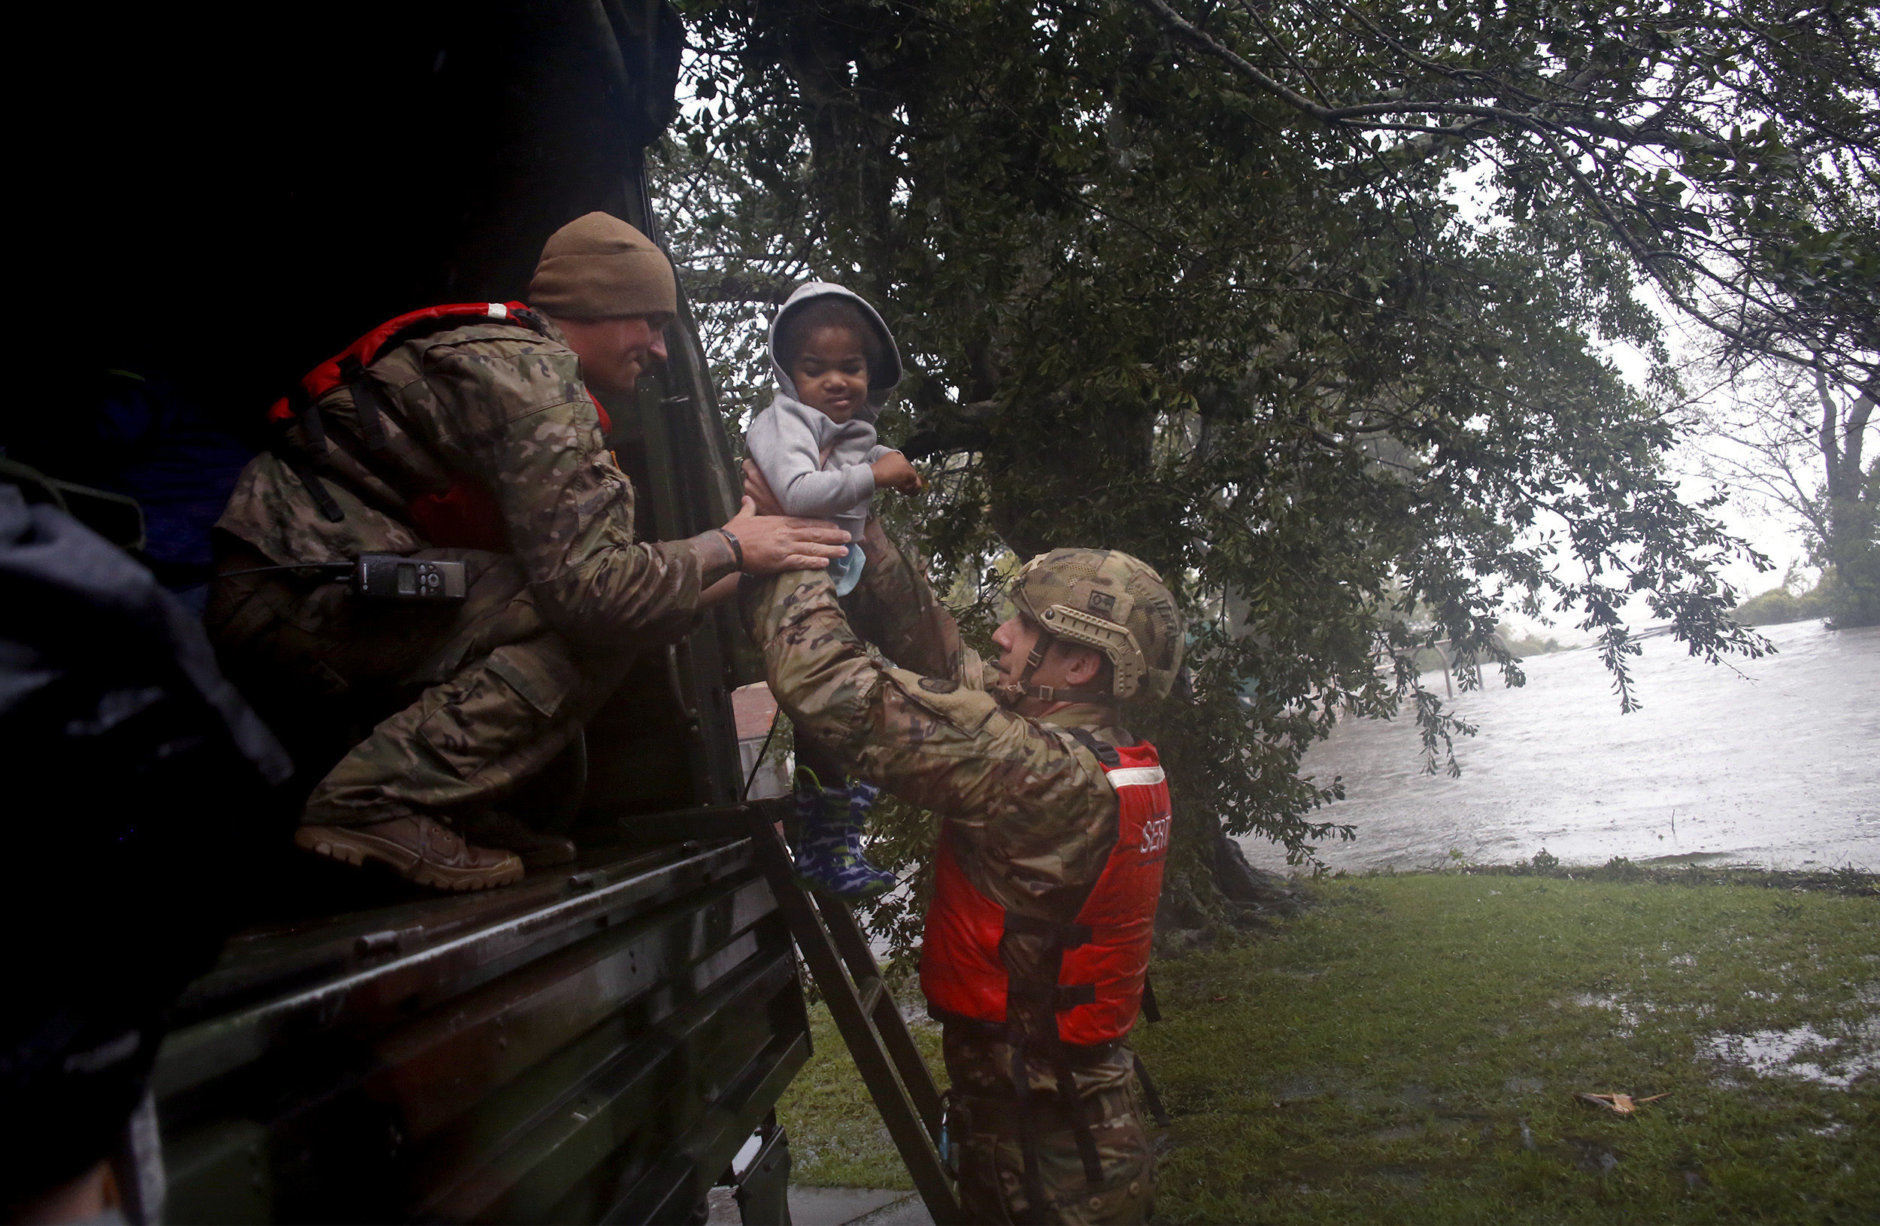 Rescue team members Sgt. Matt Locke, left, and Sgt. Nick Muhar, right, from the North Carolina National Guard 1/120th battalion, evacuates a family as the rising floodwaters from Hurricane Florence threatens their home in New Bern, N.C., on Friday, Sept. 14, 2018. (AP Photo/Chris Seward)